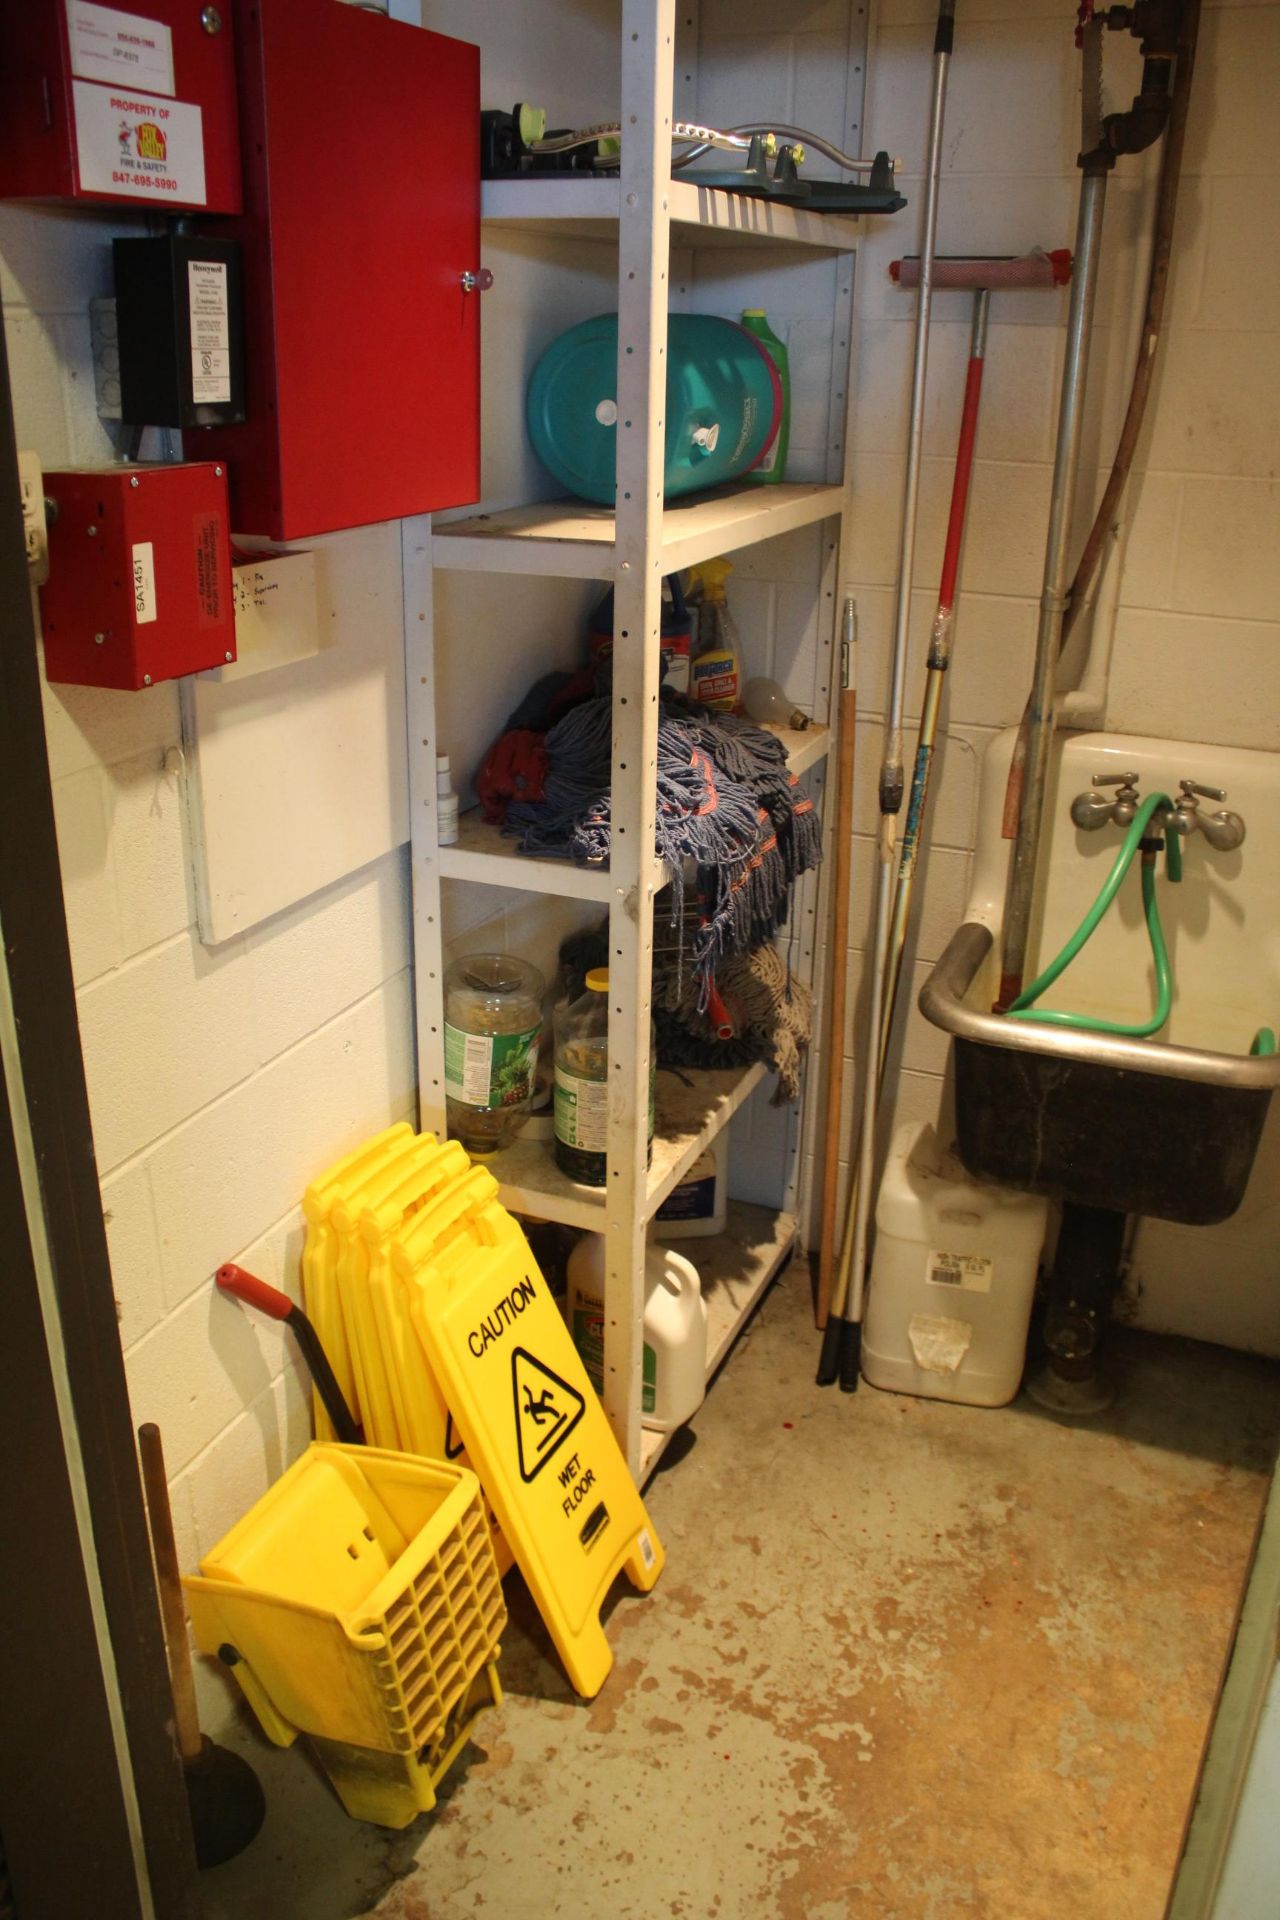 CONTENTS OF SUPPLY ROOM: MOP BUCKETS & HEADS, SPRINKLERS, ETC (NO FIRE RELATED EQUIPMENT)